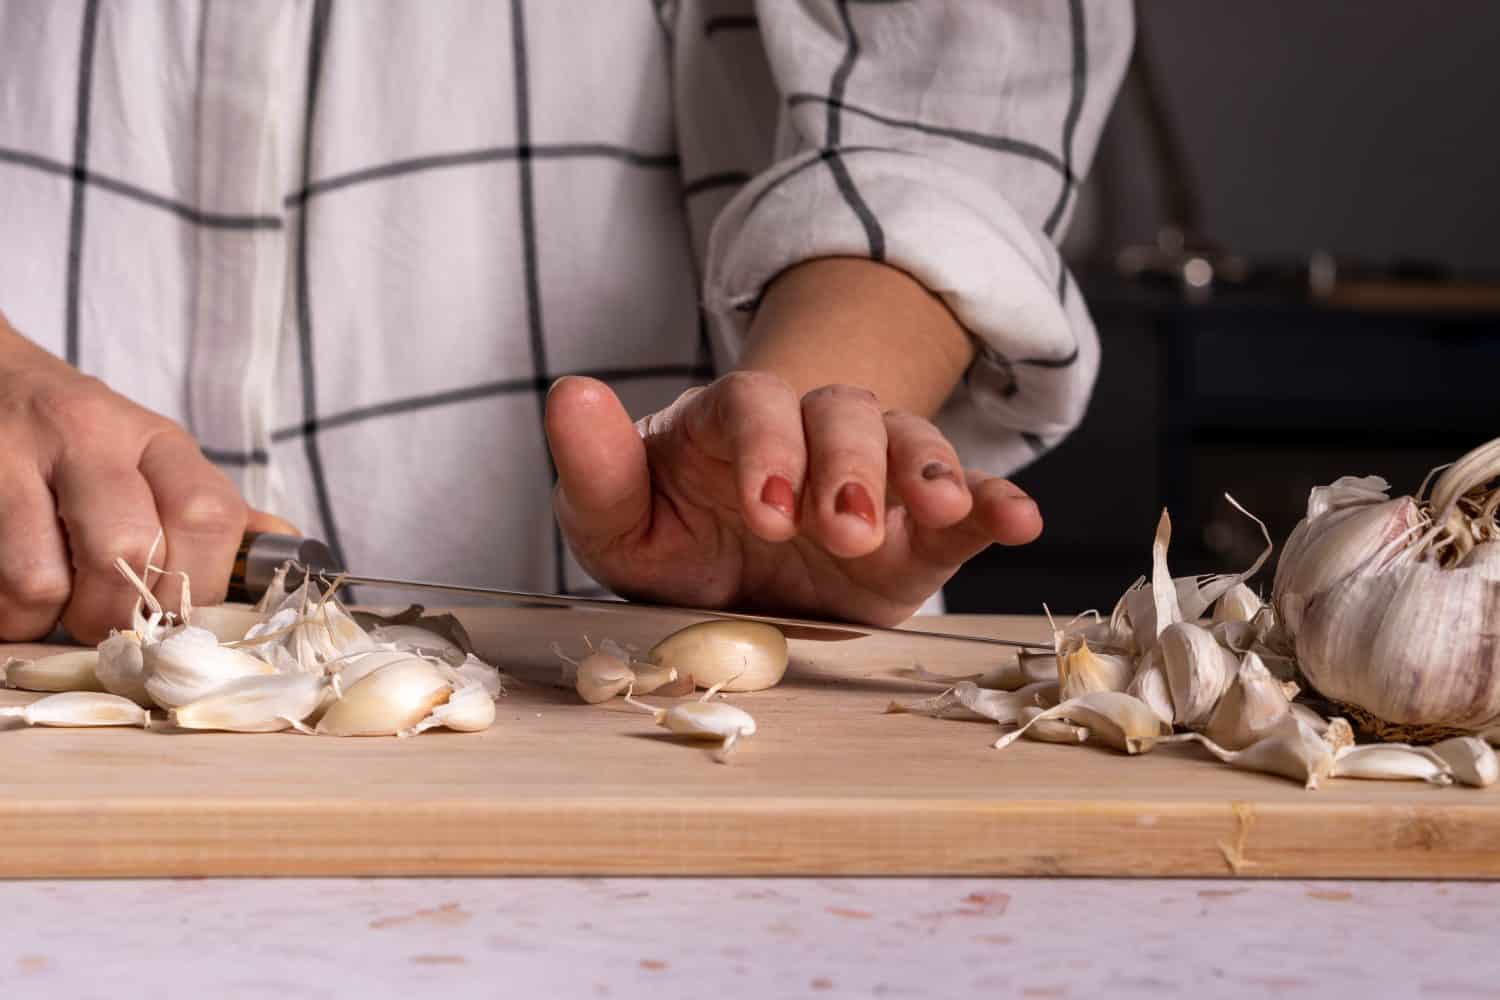 Cutting and peeling garlic cloves with a knife